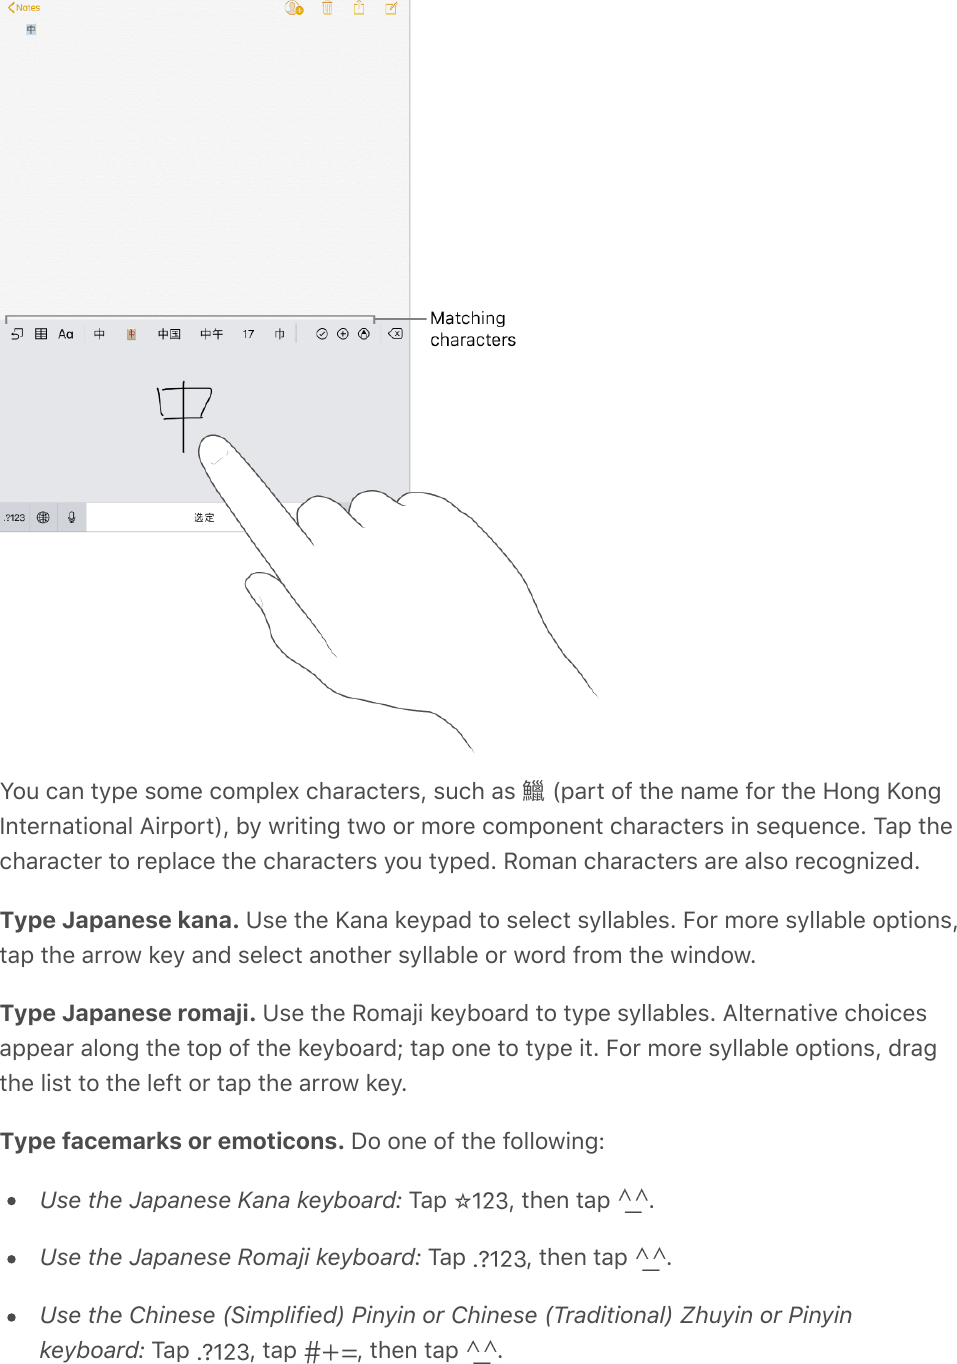 You can type some complex characters, such as 󵙛 (part of the name for the Hong KongInternational Airport), by writing two or more component characters in sequence. Tap thecharacter to replace the characters you typed. Roman characters are also recognized.Type Japanese kana. Use the Kana keypad to select syllables. For more syllable options,tap the arrow key and select another syllable or word from the window.Type Japanese romaji. Use the Romaji keyboard to type syllables. Alternative choicesappear along the top of the keyboard; tap one to type it. For more syllable options, dragthe list to the left or tap the arrow key.Type facemarks or emoticons. Do one of the following:Use the Japanese Kana keyboard: Tap  , then tap  .Use the Japanese Romaji keyboard: Tap  , then tap  .Use the Chinese (Simplified) Pinyin or Chinese (Traditional) Zhuyin or Pinyinkeyboard: Tap  , tap  , then tap  .